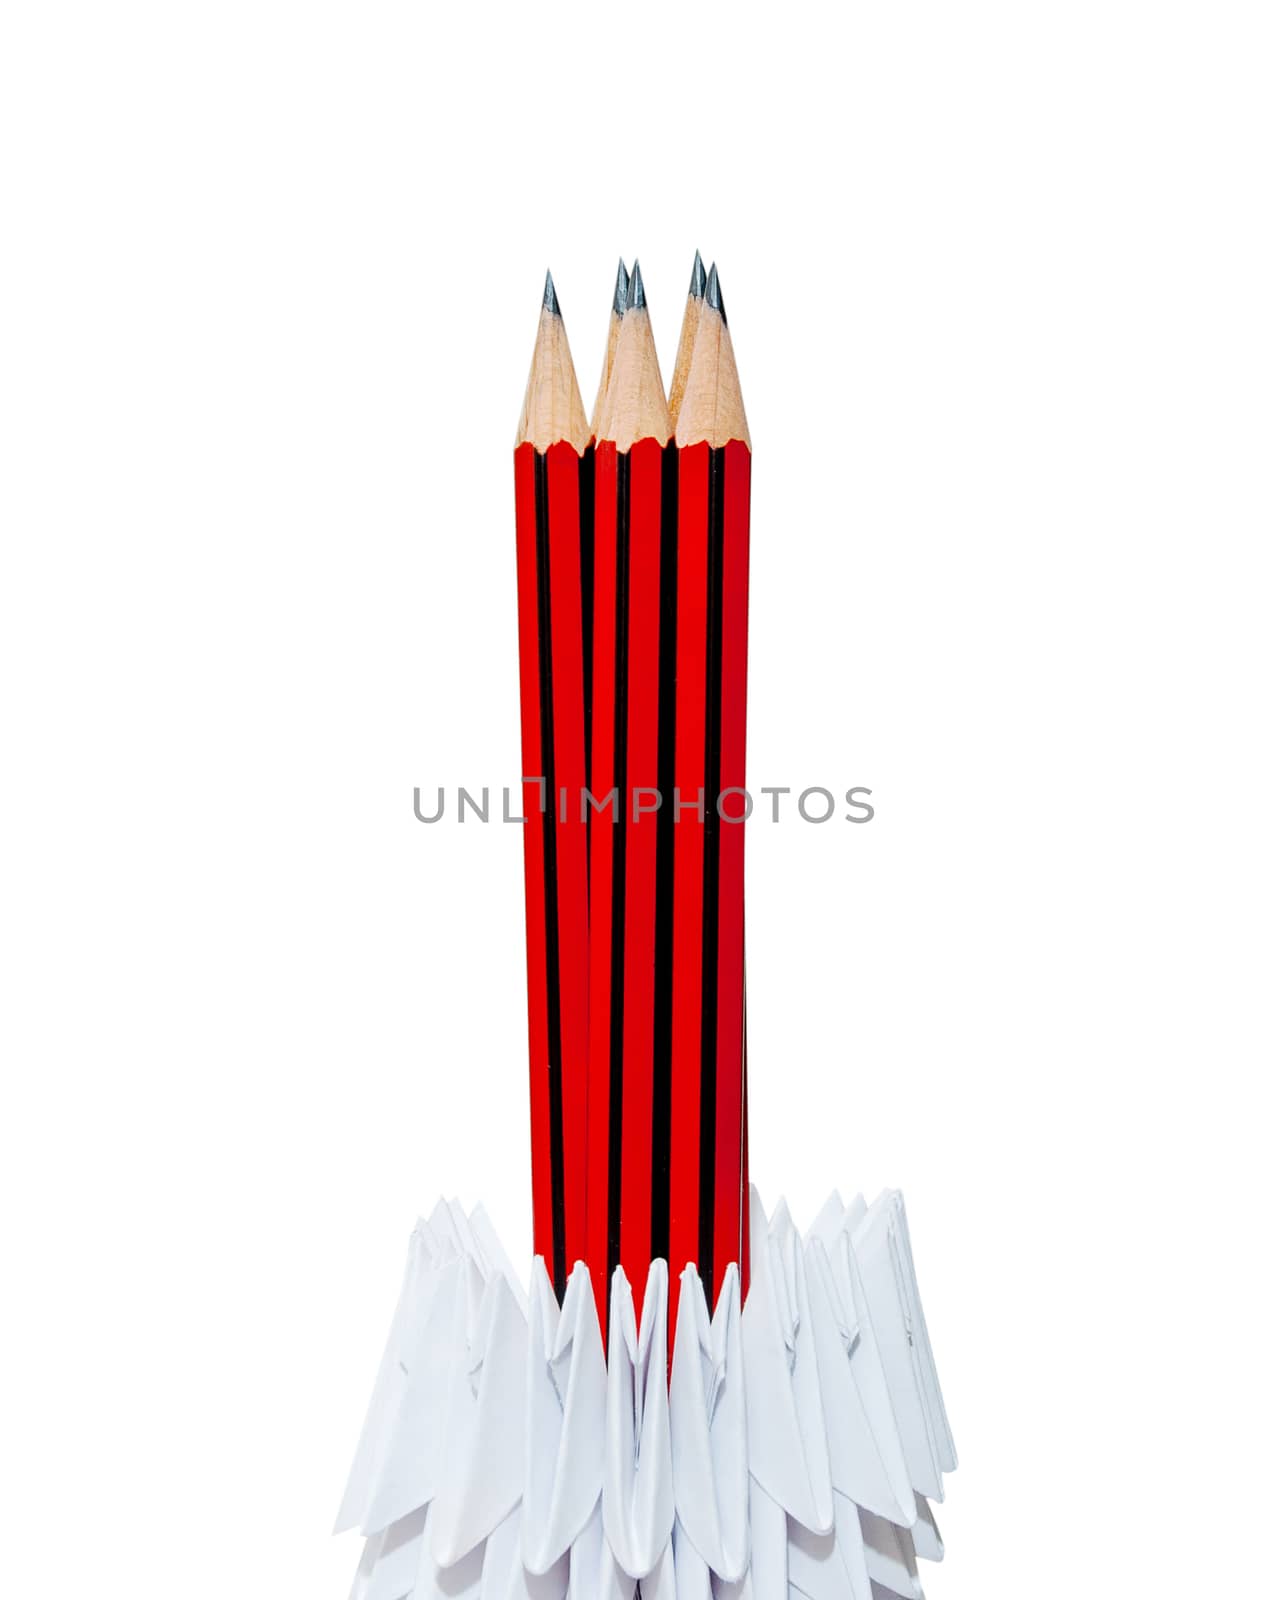 Group of pencils for drawing on a stand on an isolated background.